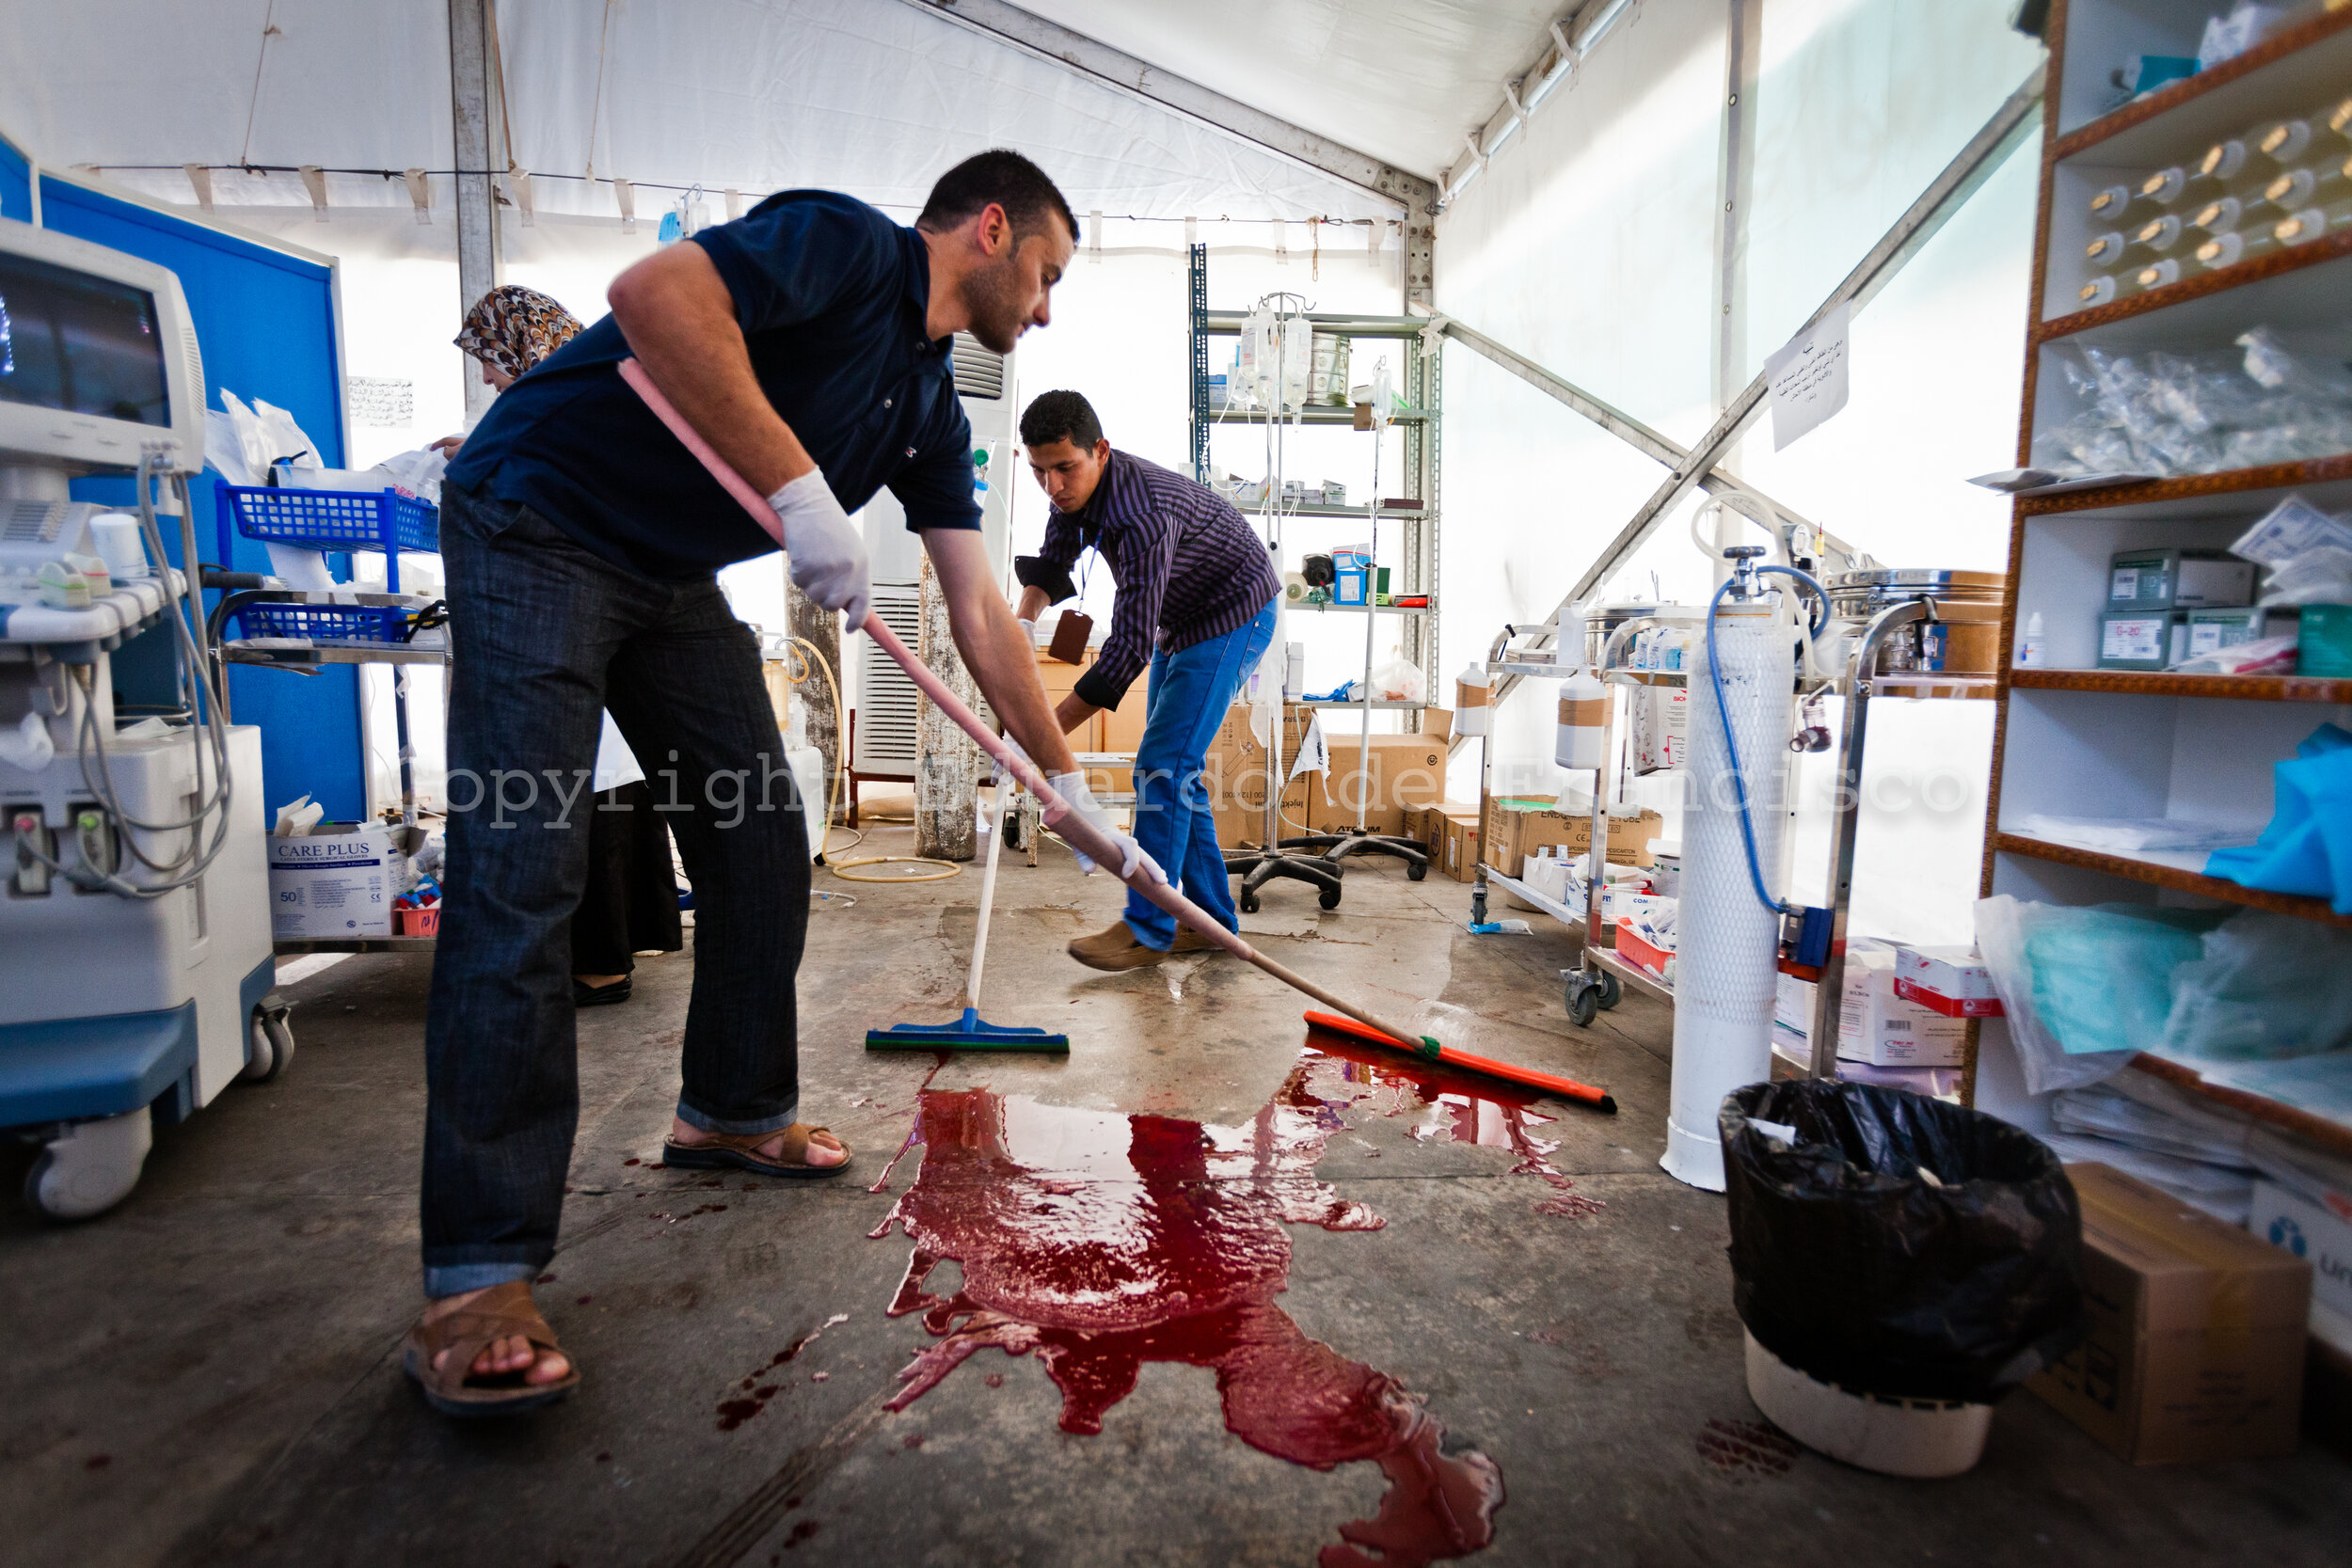  Workers at the emergency unit of Al Hikma hospital in Misrata clean a poodle of blood after a severely injured soldier was treated 